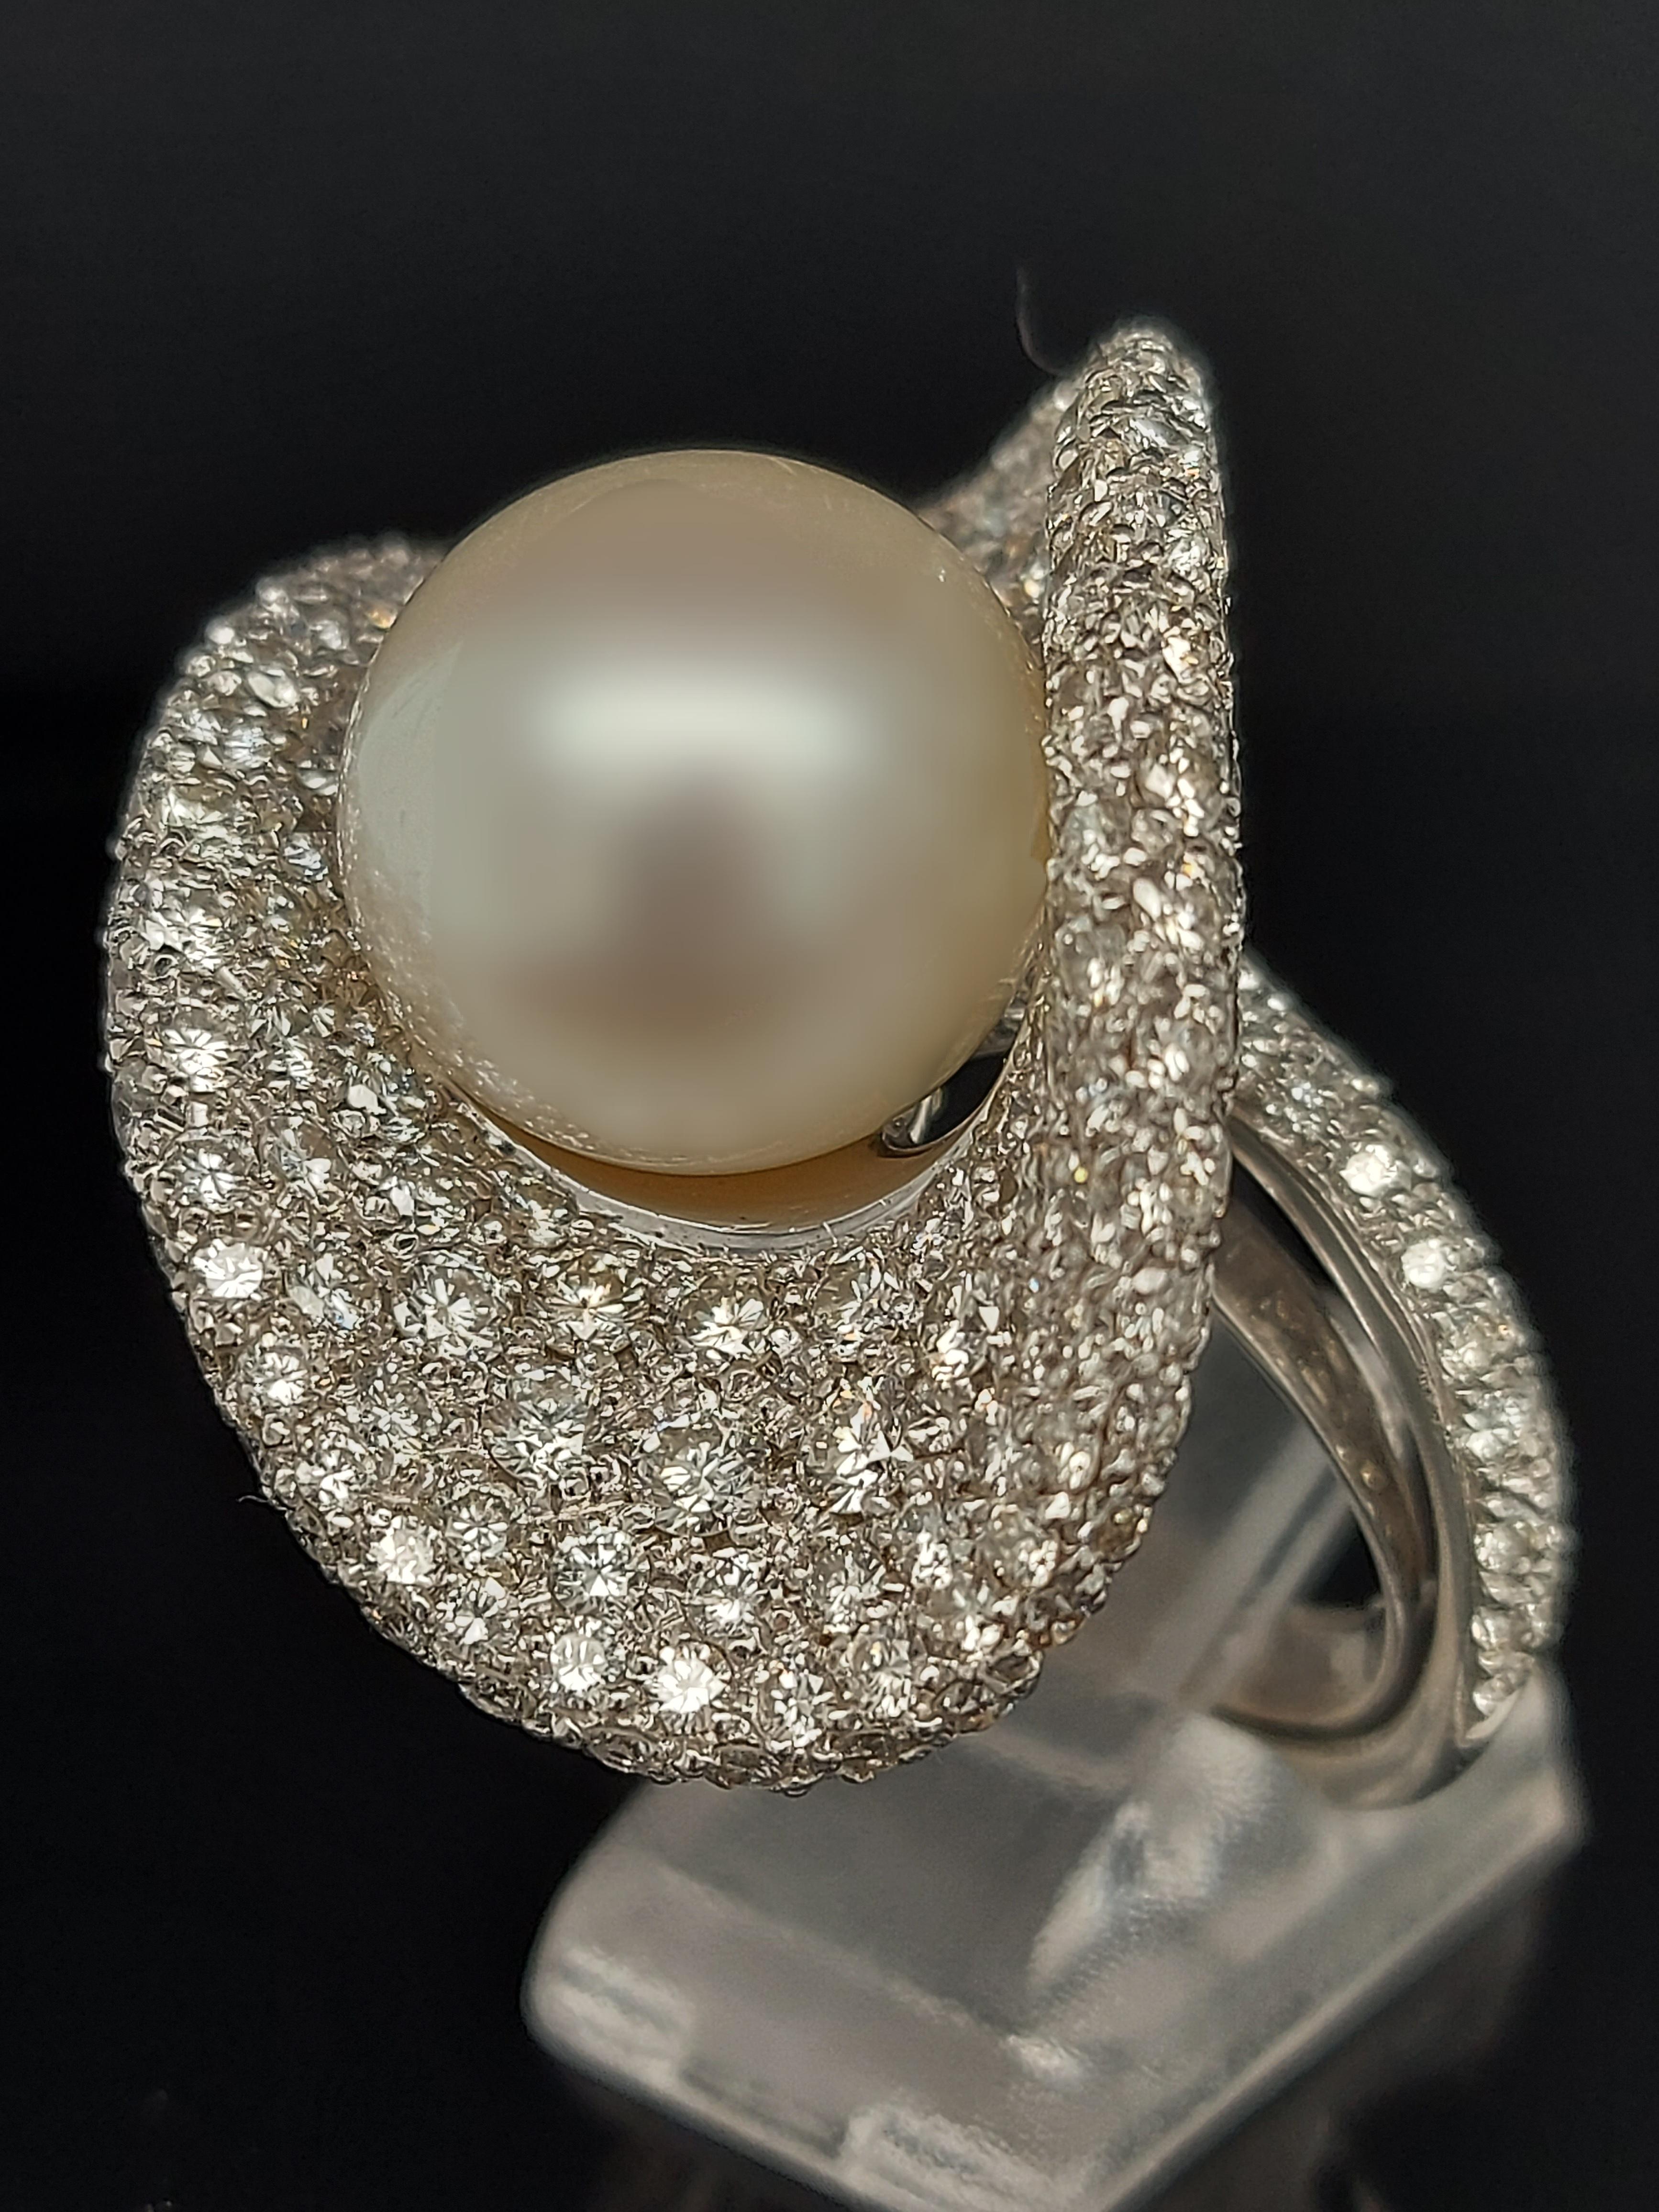 Magnificent 18 Karat White Gold Ring with 14.5 Carat Diamonds and a Big Pearl For Sale 1